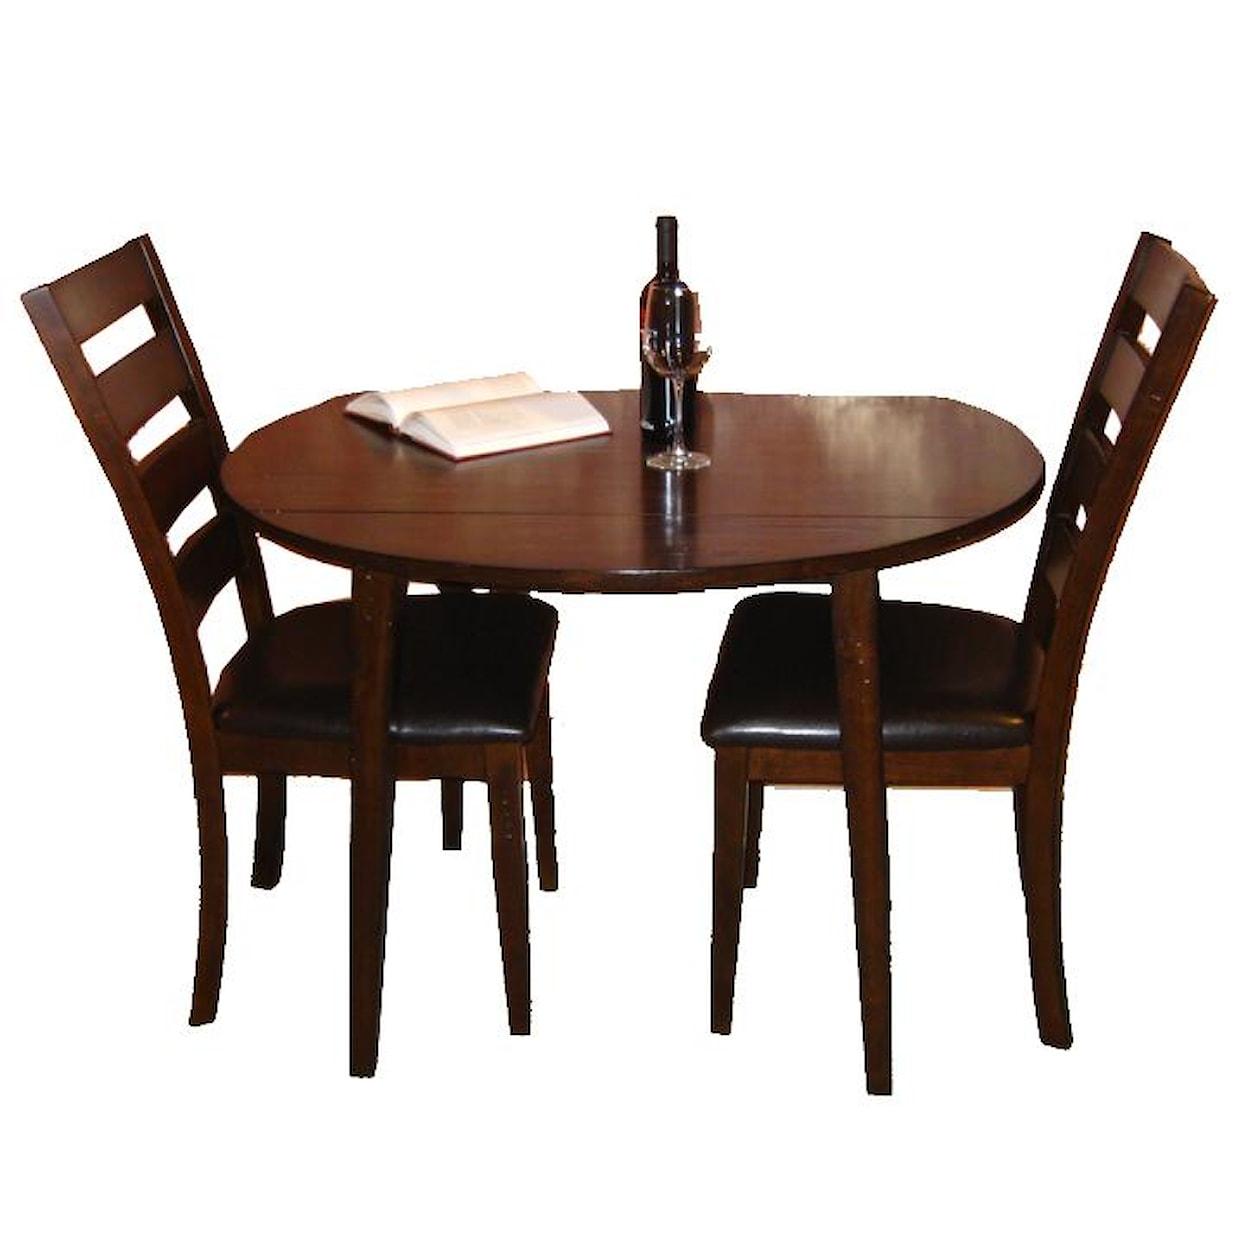 Intercon Kona Drop Leaf Dining Table and Chair Set